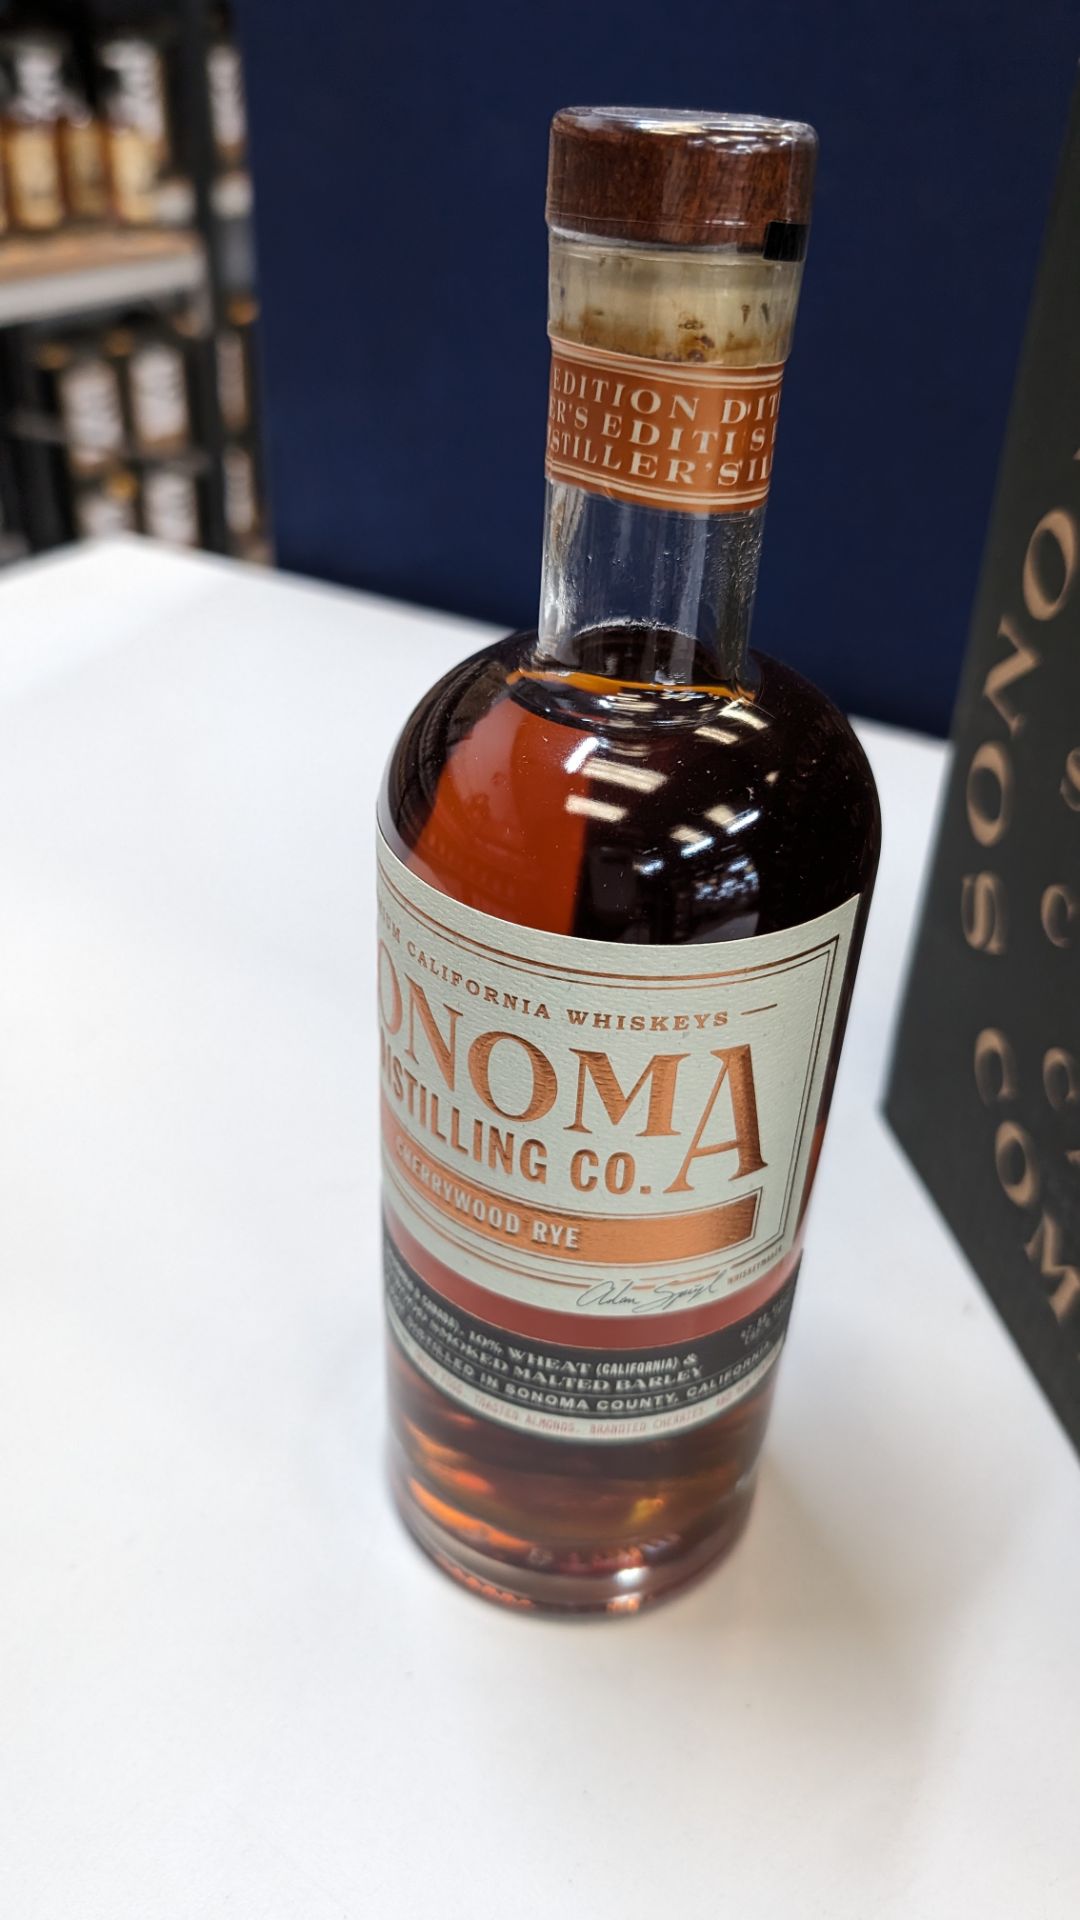 6 off 700ml bottles of Sonoma Cherrywood Rye Whiskey. In Sonoma branded box which includes bottling - Image 2 of 6